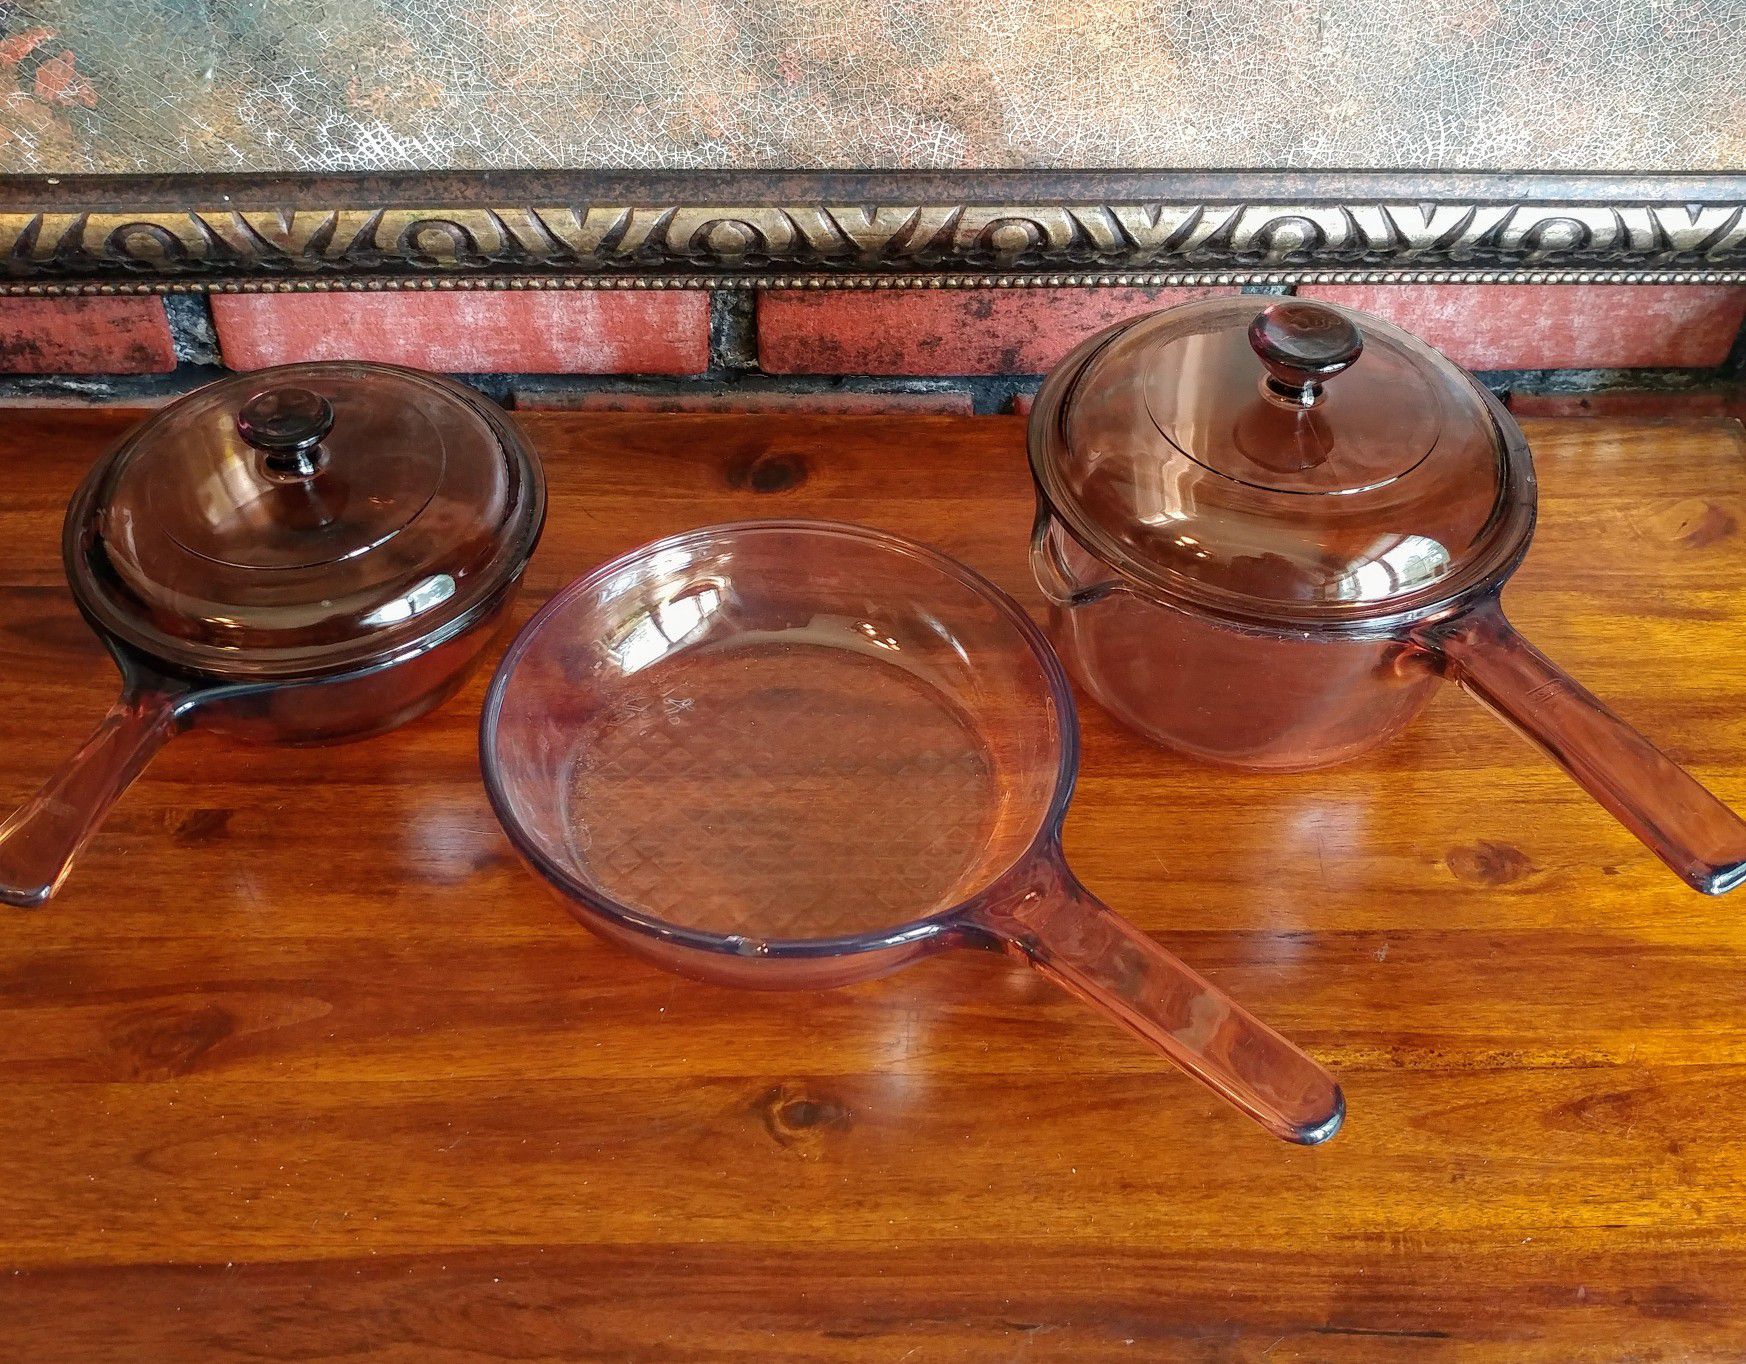 Vision cookware pots used clean all shown asking $10.